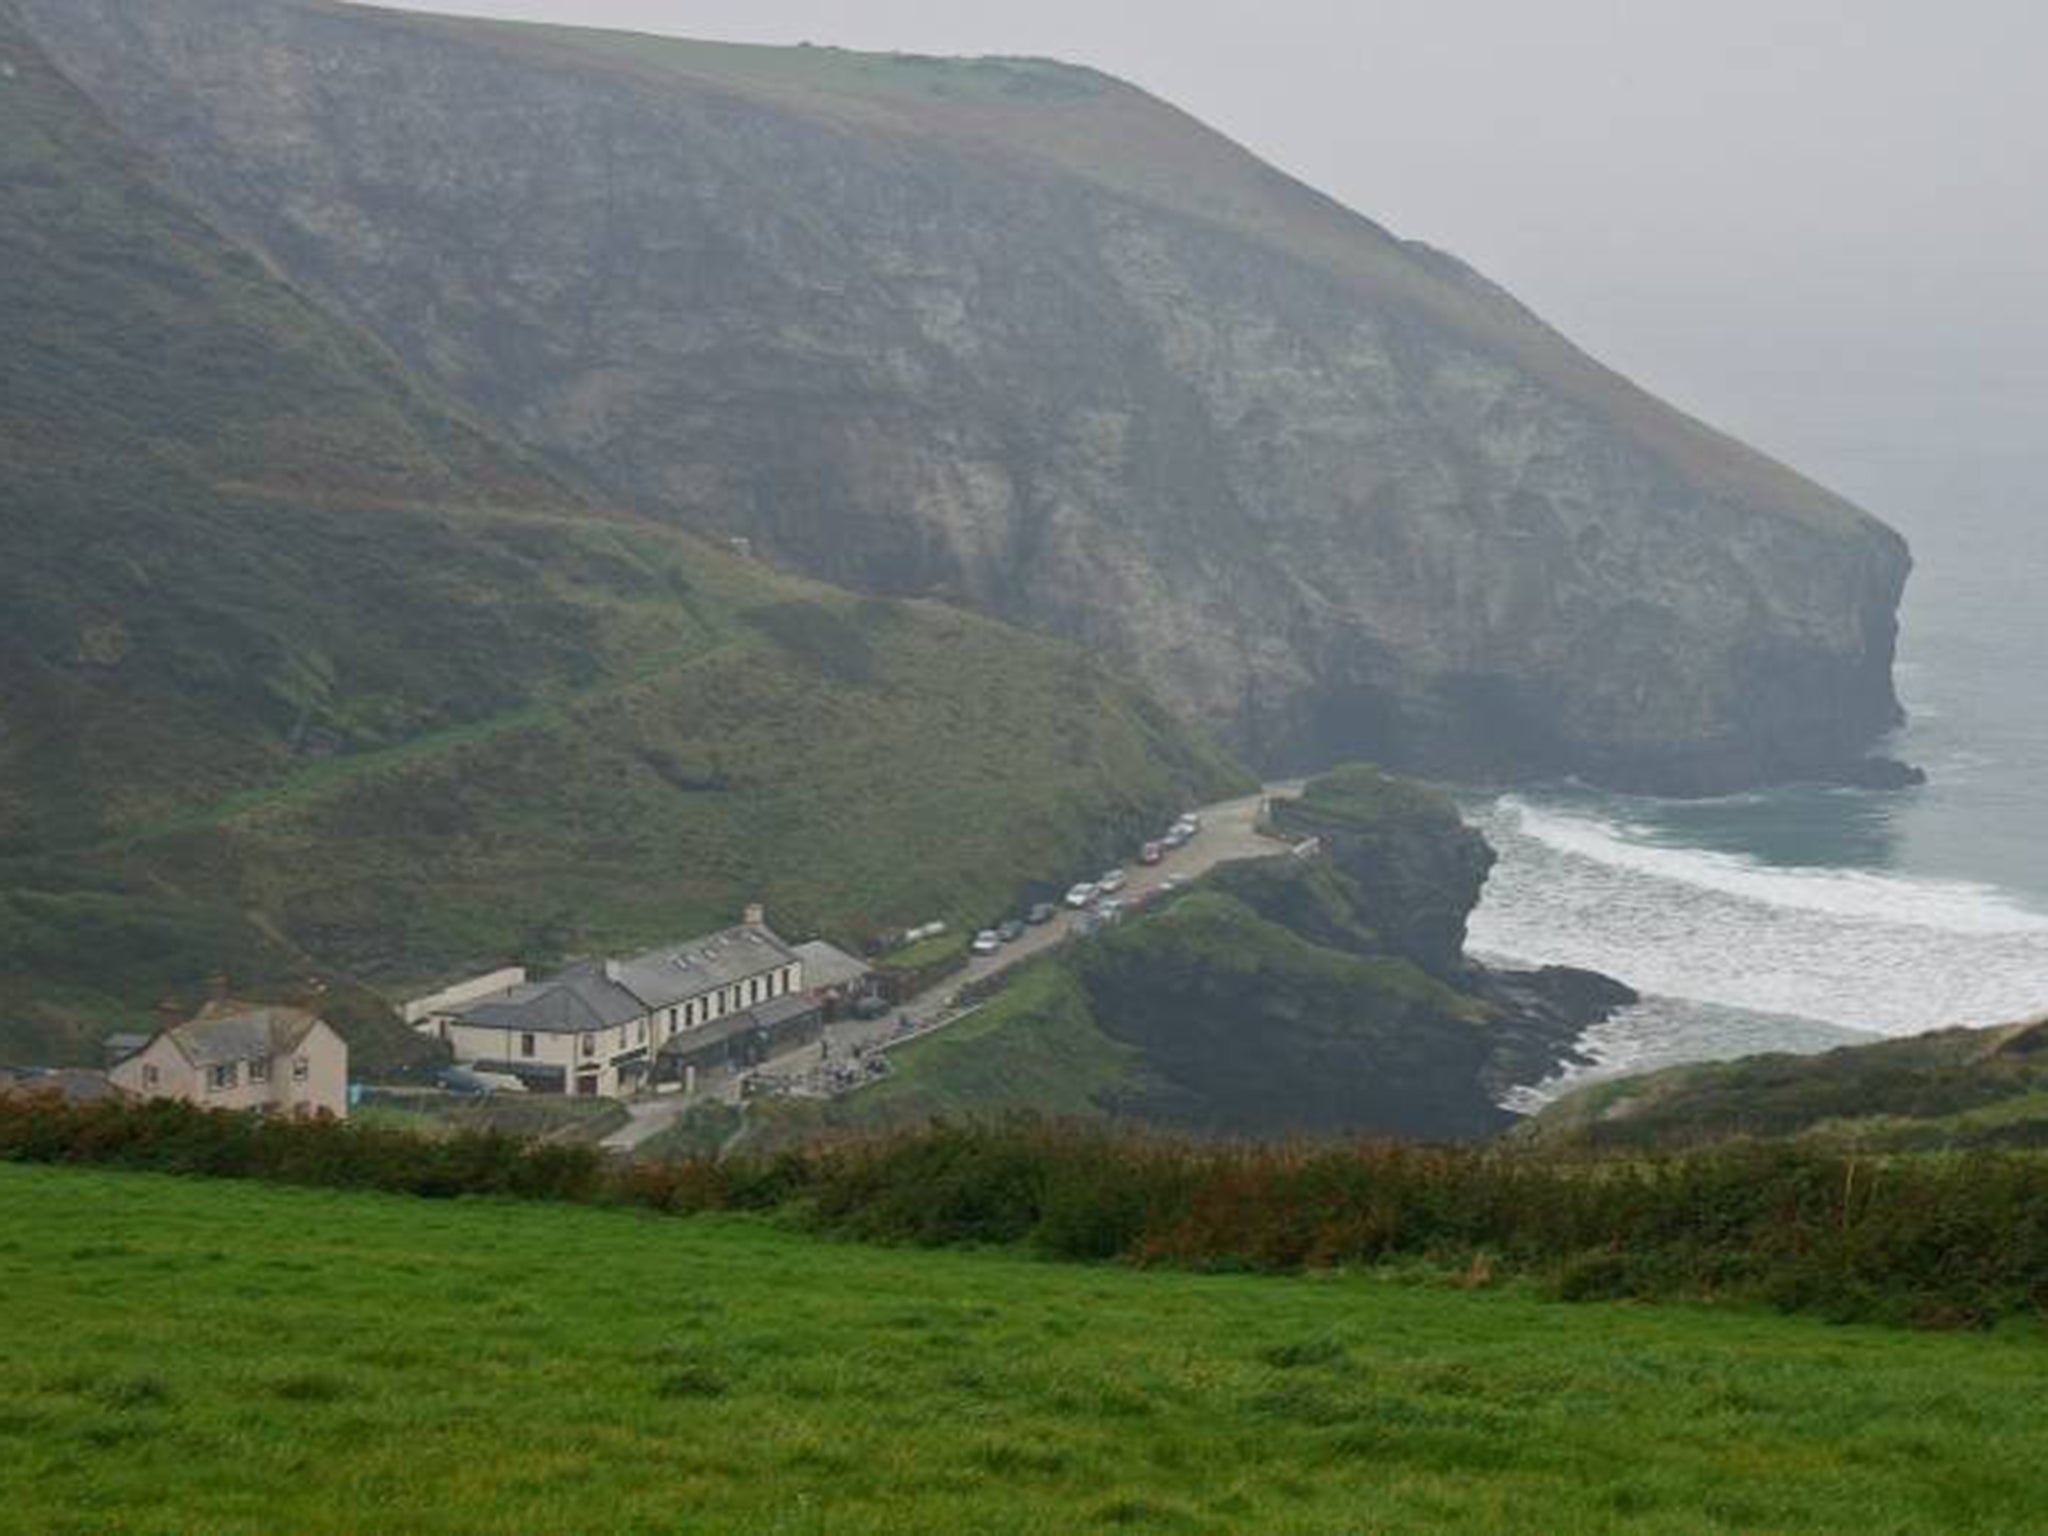 The man was caught by a large wave at Port William in Cornwall whilst spreading ashes